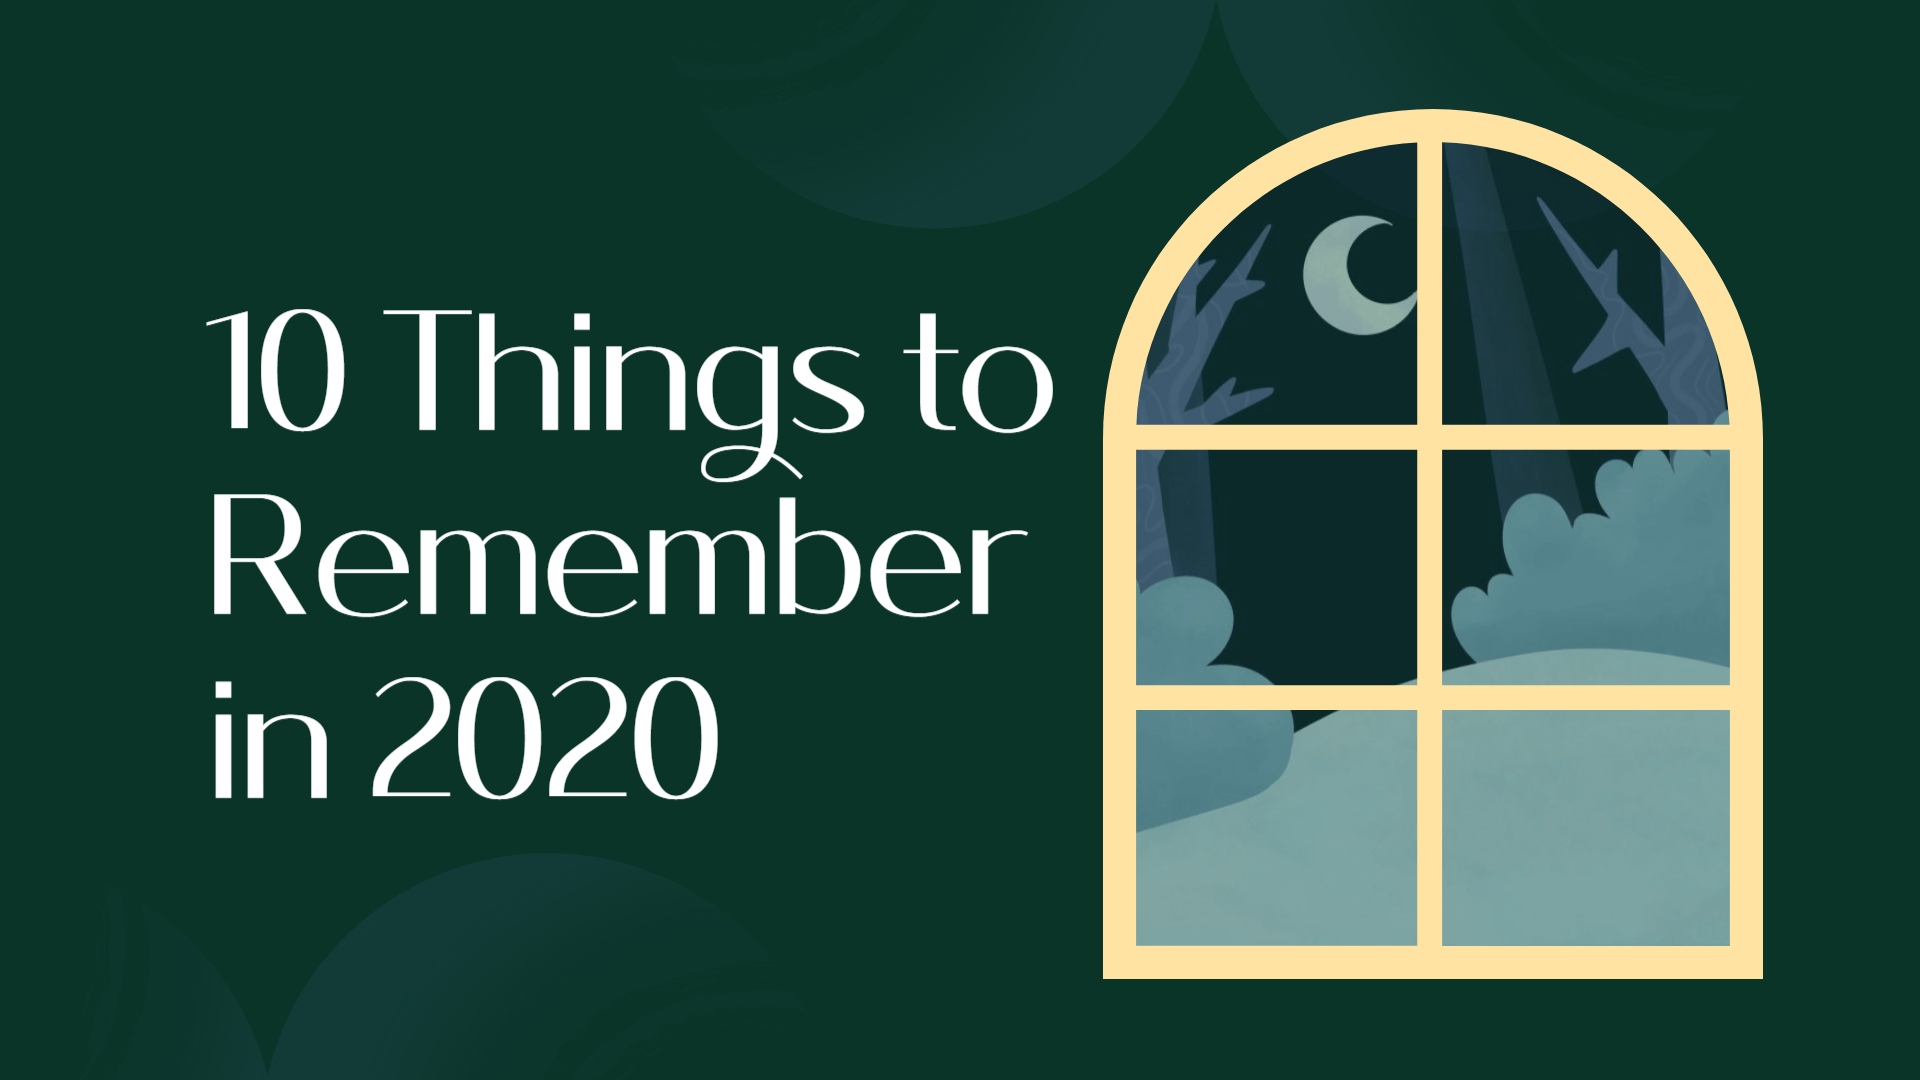 10 Things to Remember in 2020